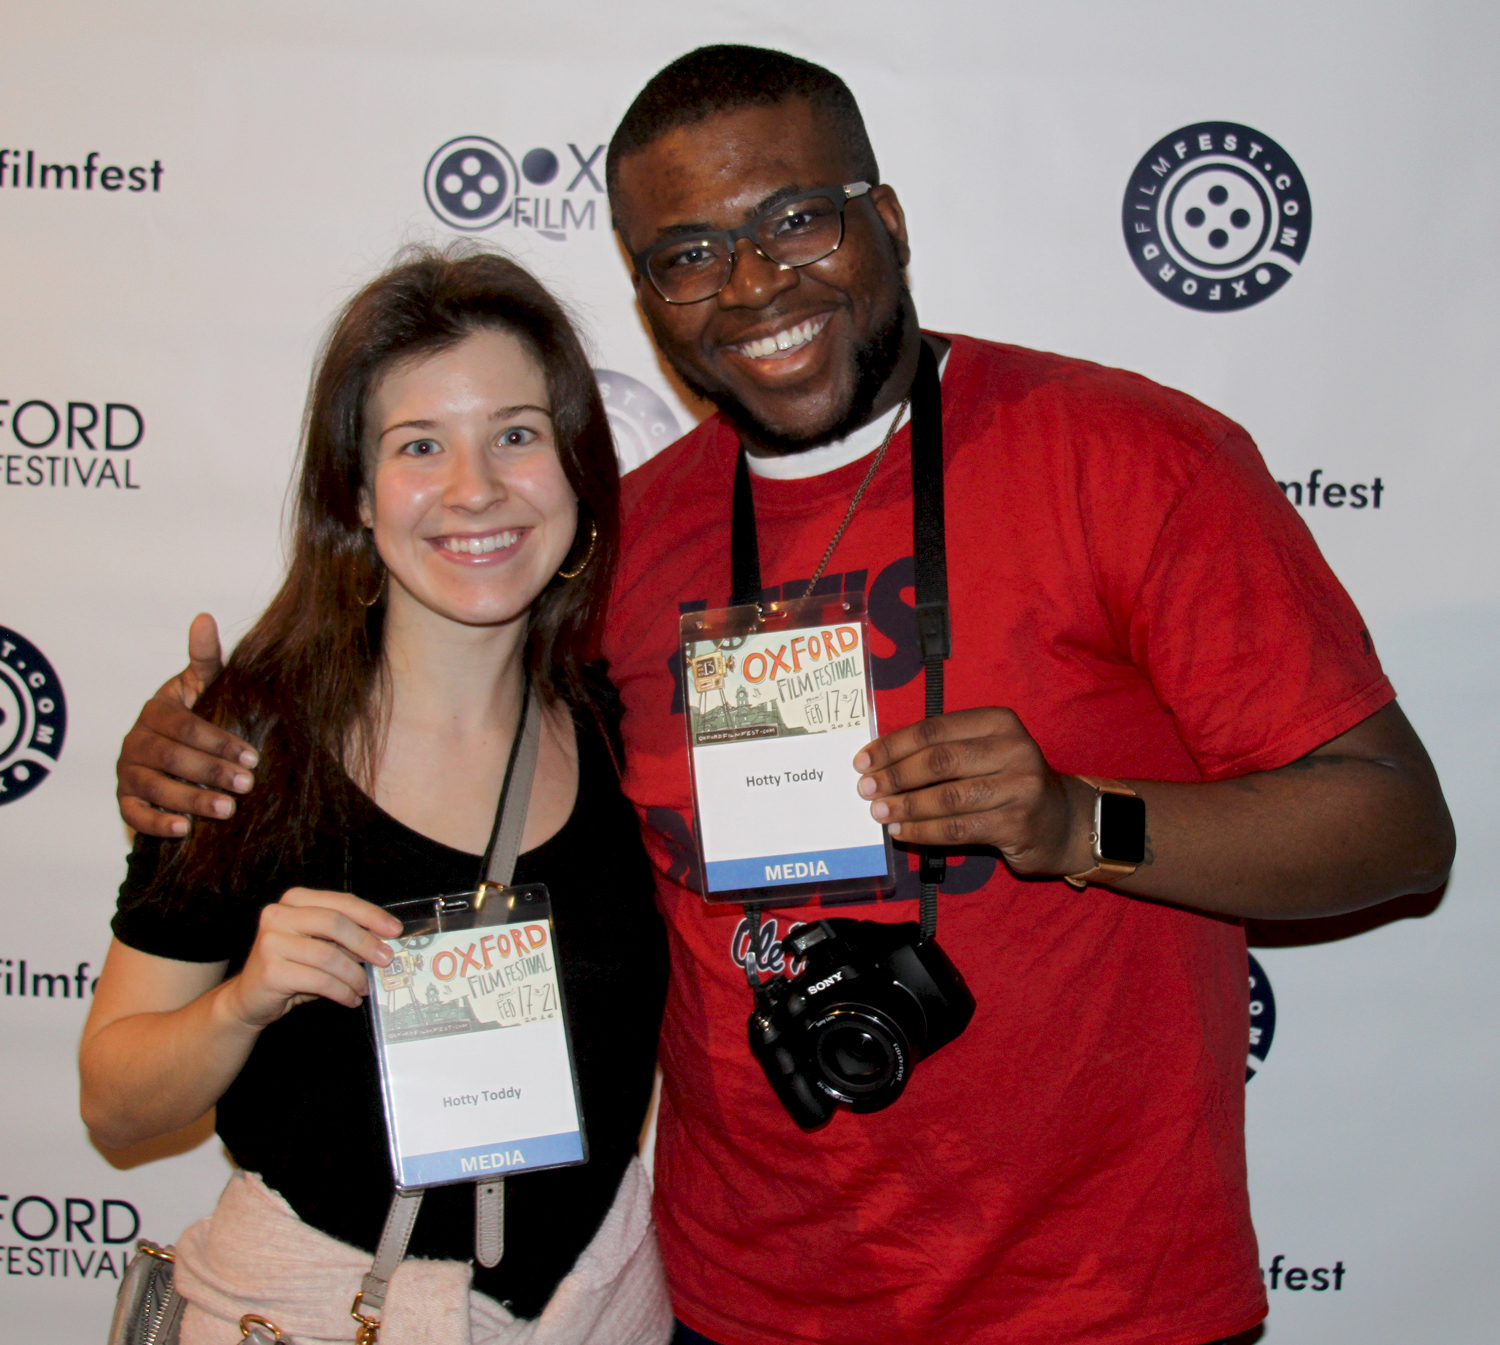 HottyToddy.com interns Hannah Pickett (left) and Christopher Neal take a break for a photo op at Oxford Film Festival's red carpet event at the Lyric Oxford. Photo by Jeff McVay